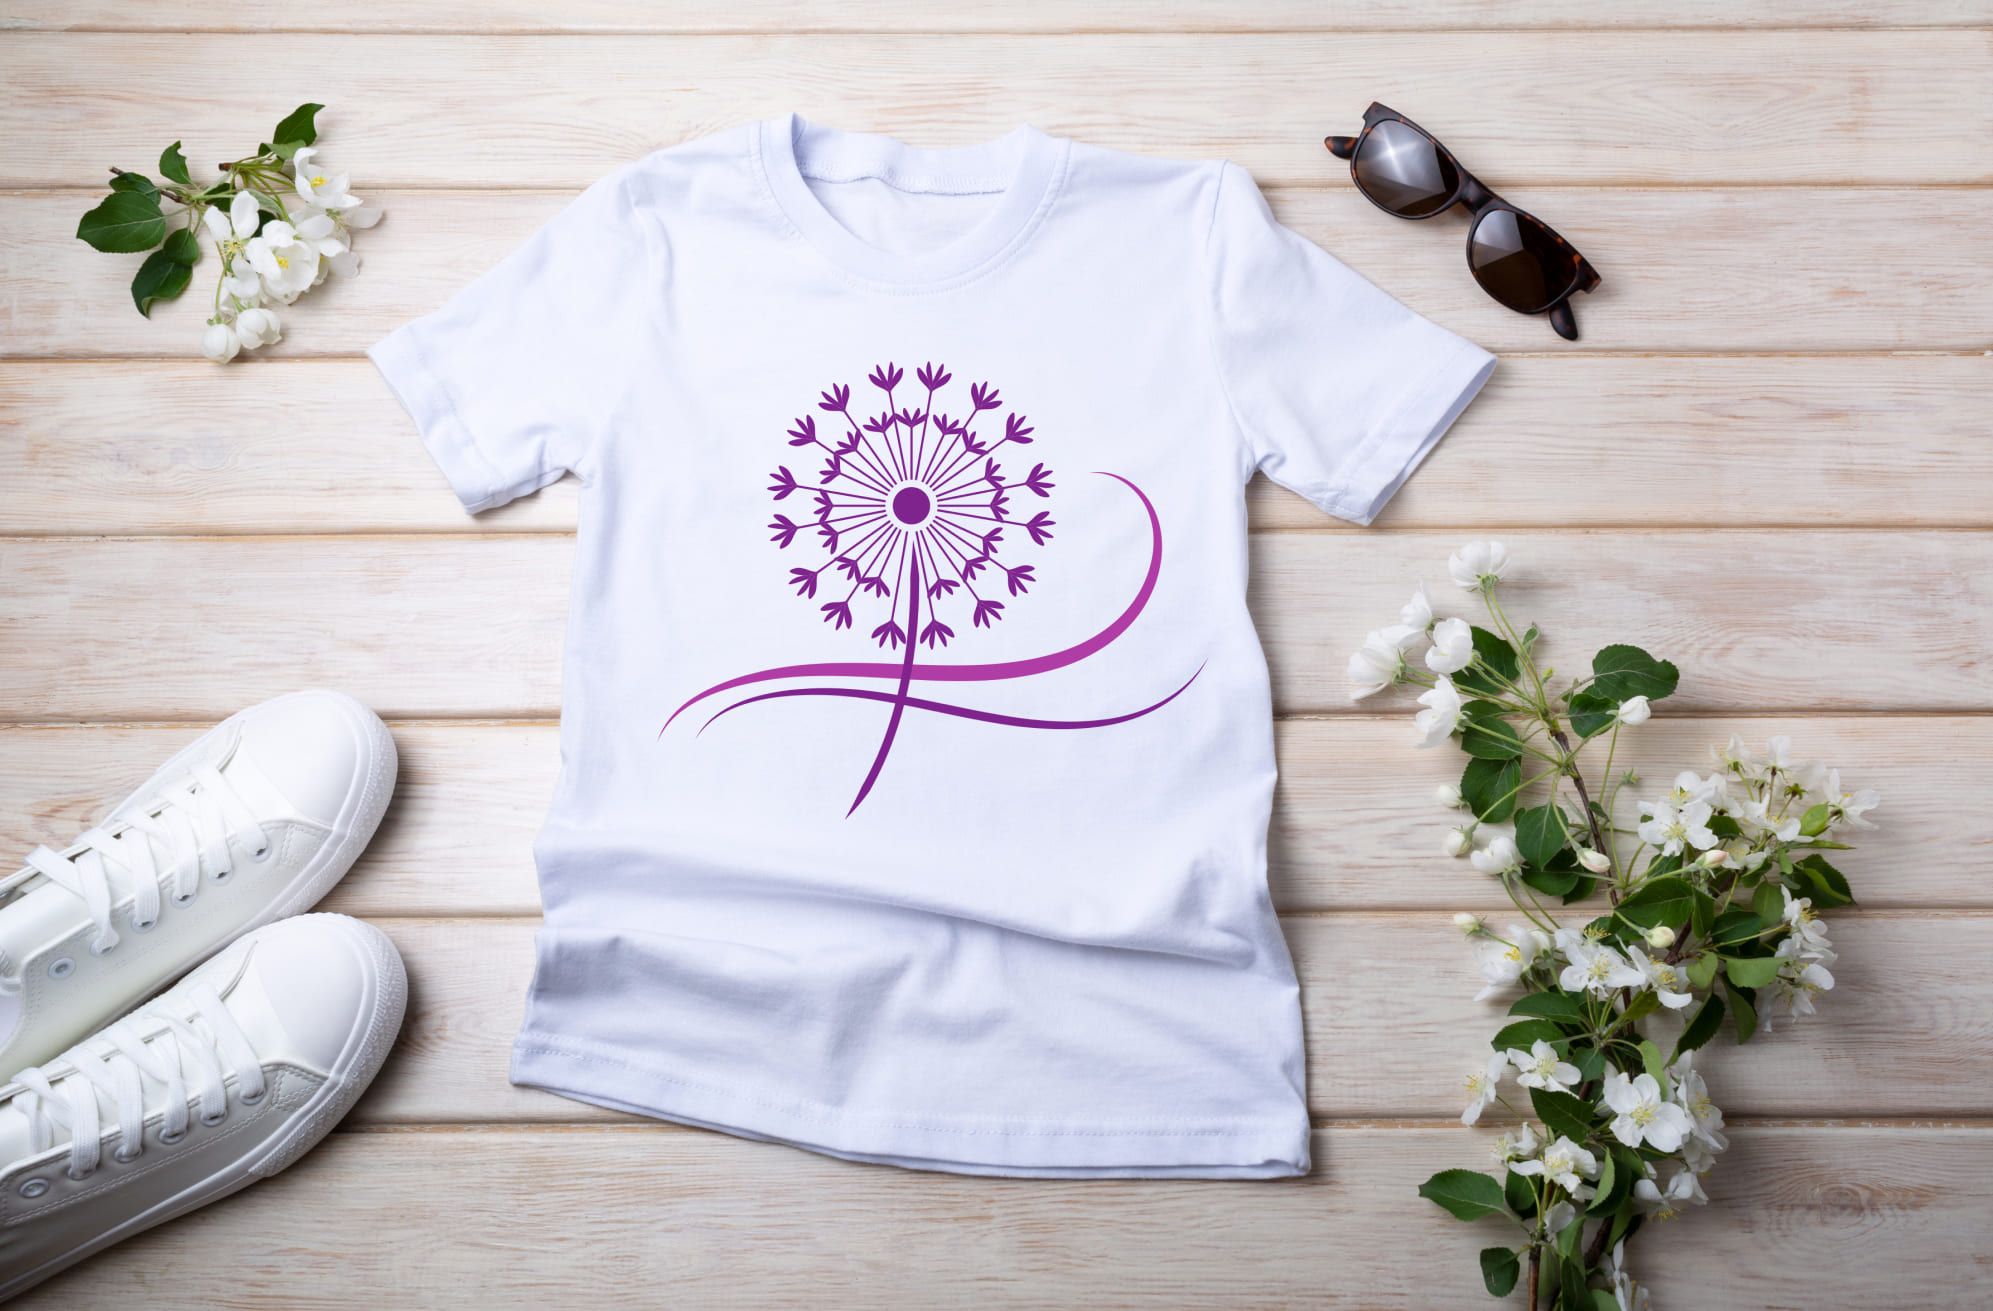 White T-shirt with purple dandelion flower and sunglasses with white sneakers.